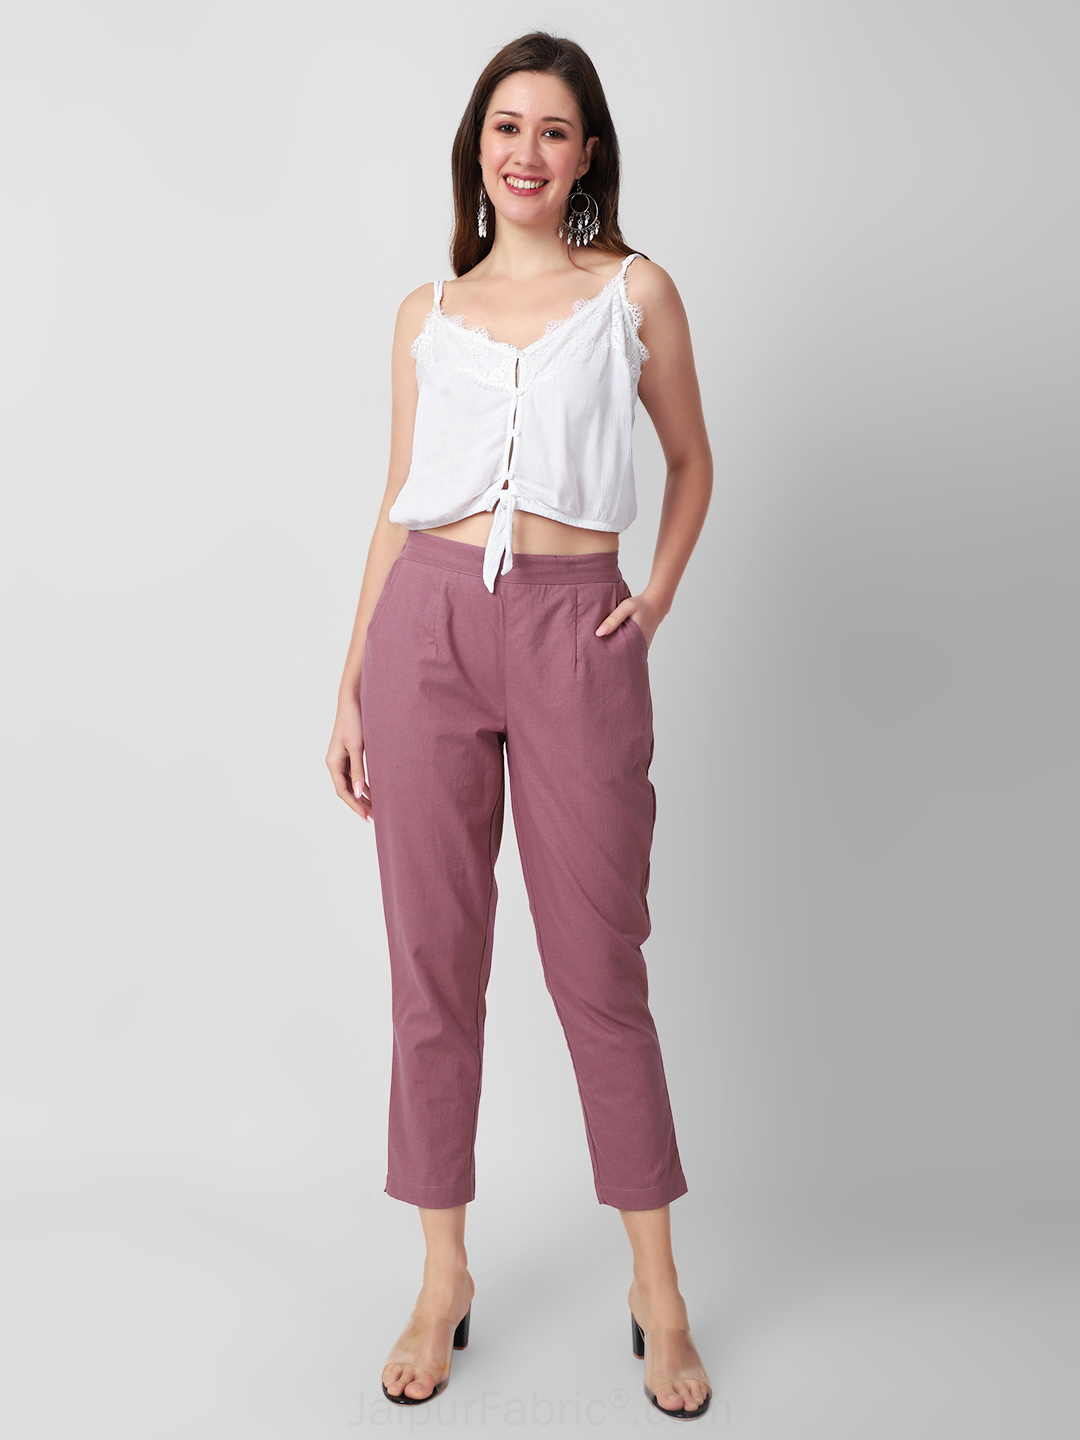 Sage green plain pant in cotton for casual look - G3-WFP59 | G3fashion.com  | Plain pants, Casual looks, Women pants casual